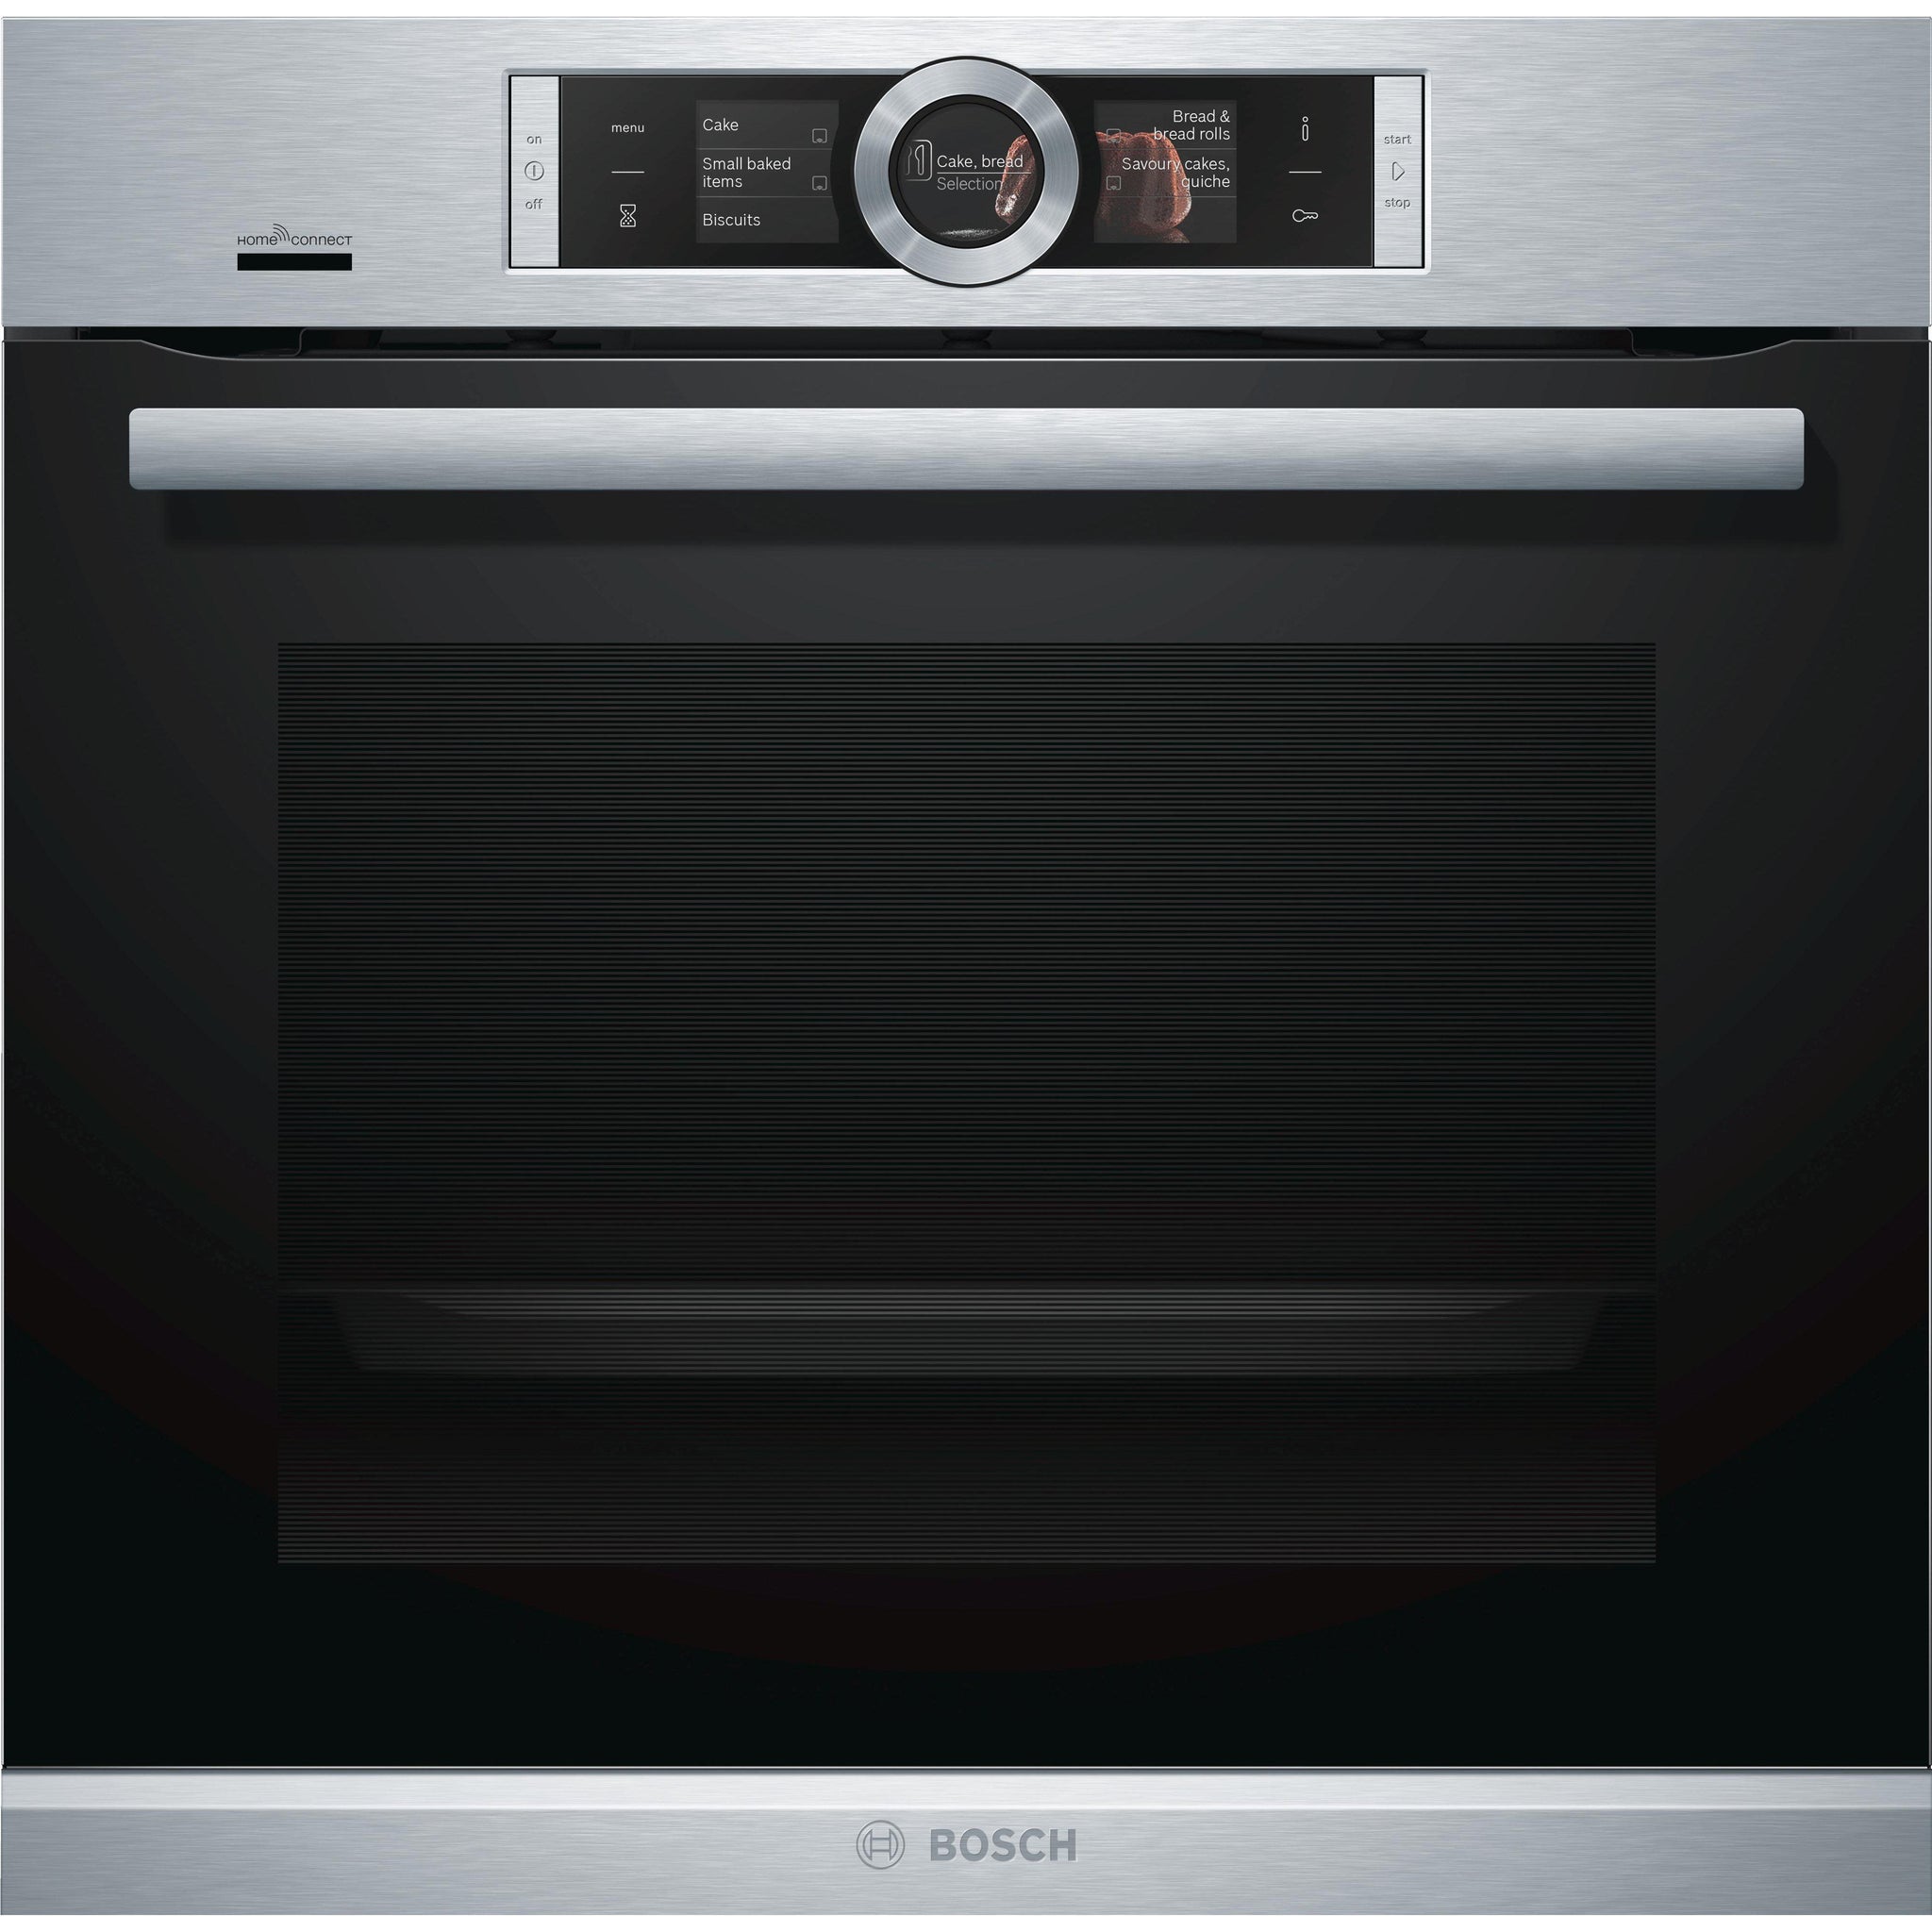 Bosch Series 8 Hbg6764s6b 60cm Builtin Single Oven Stainless Steel Delivery Within 57 Days